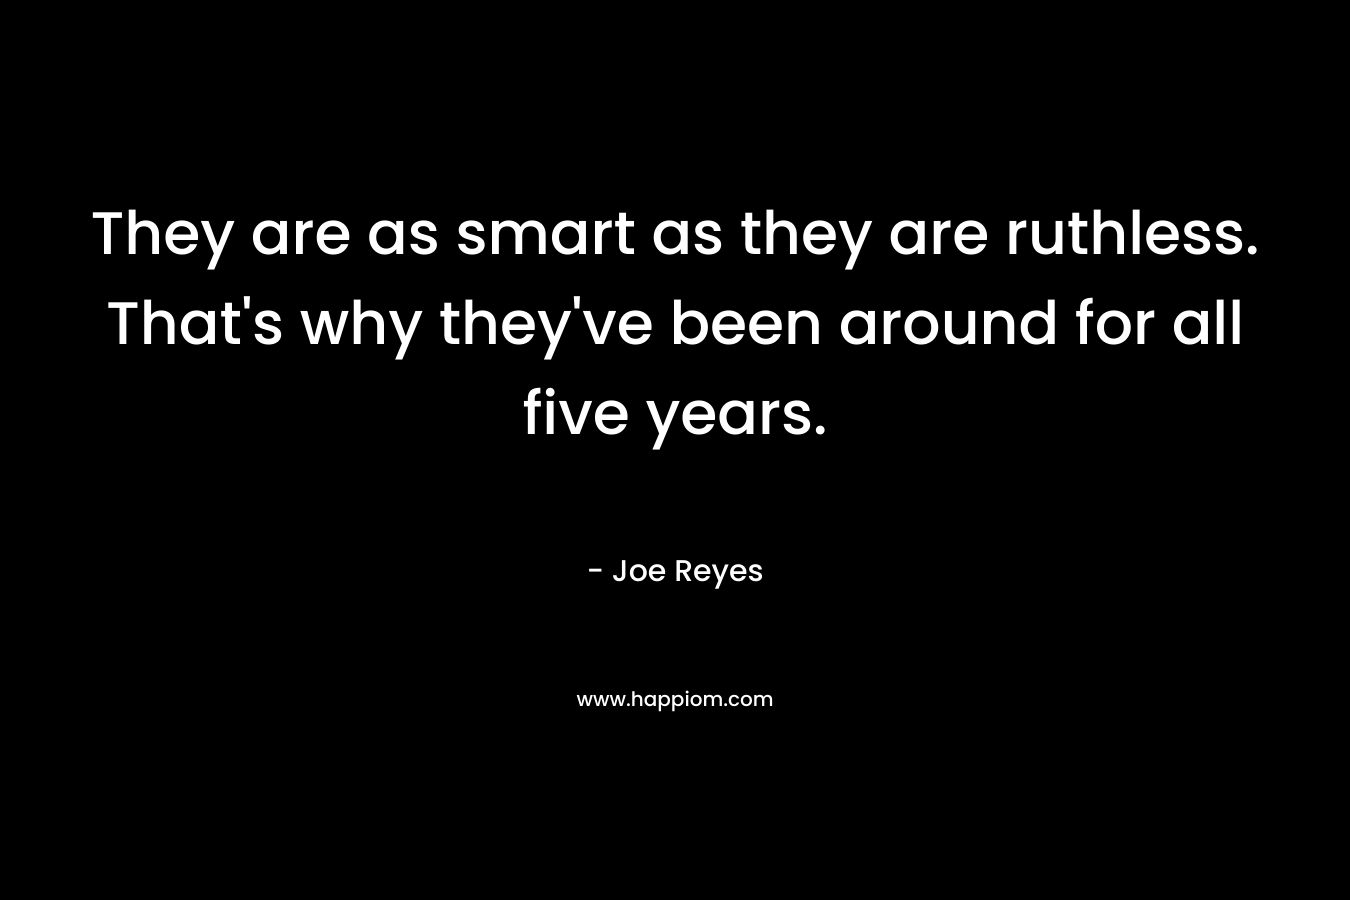 They are as smart as they are ruthless. That’s why they’ve been around for all five years. – Joe Reyes